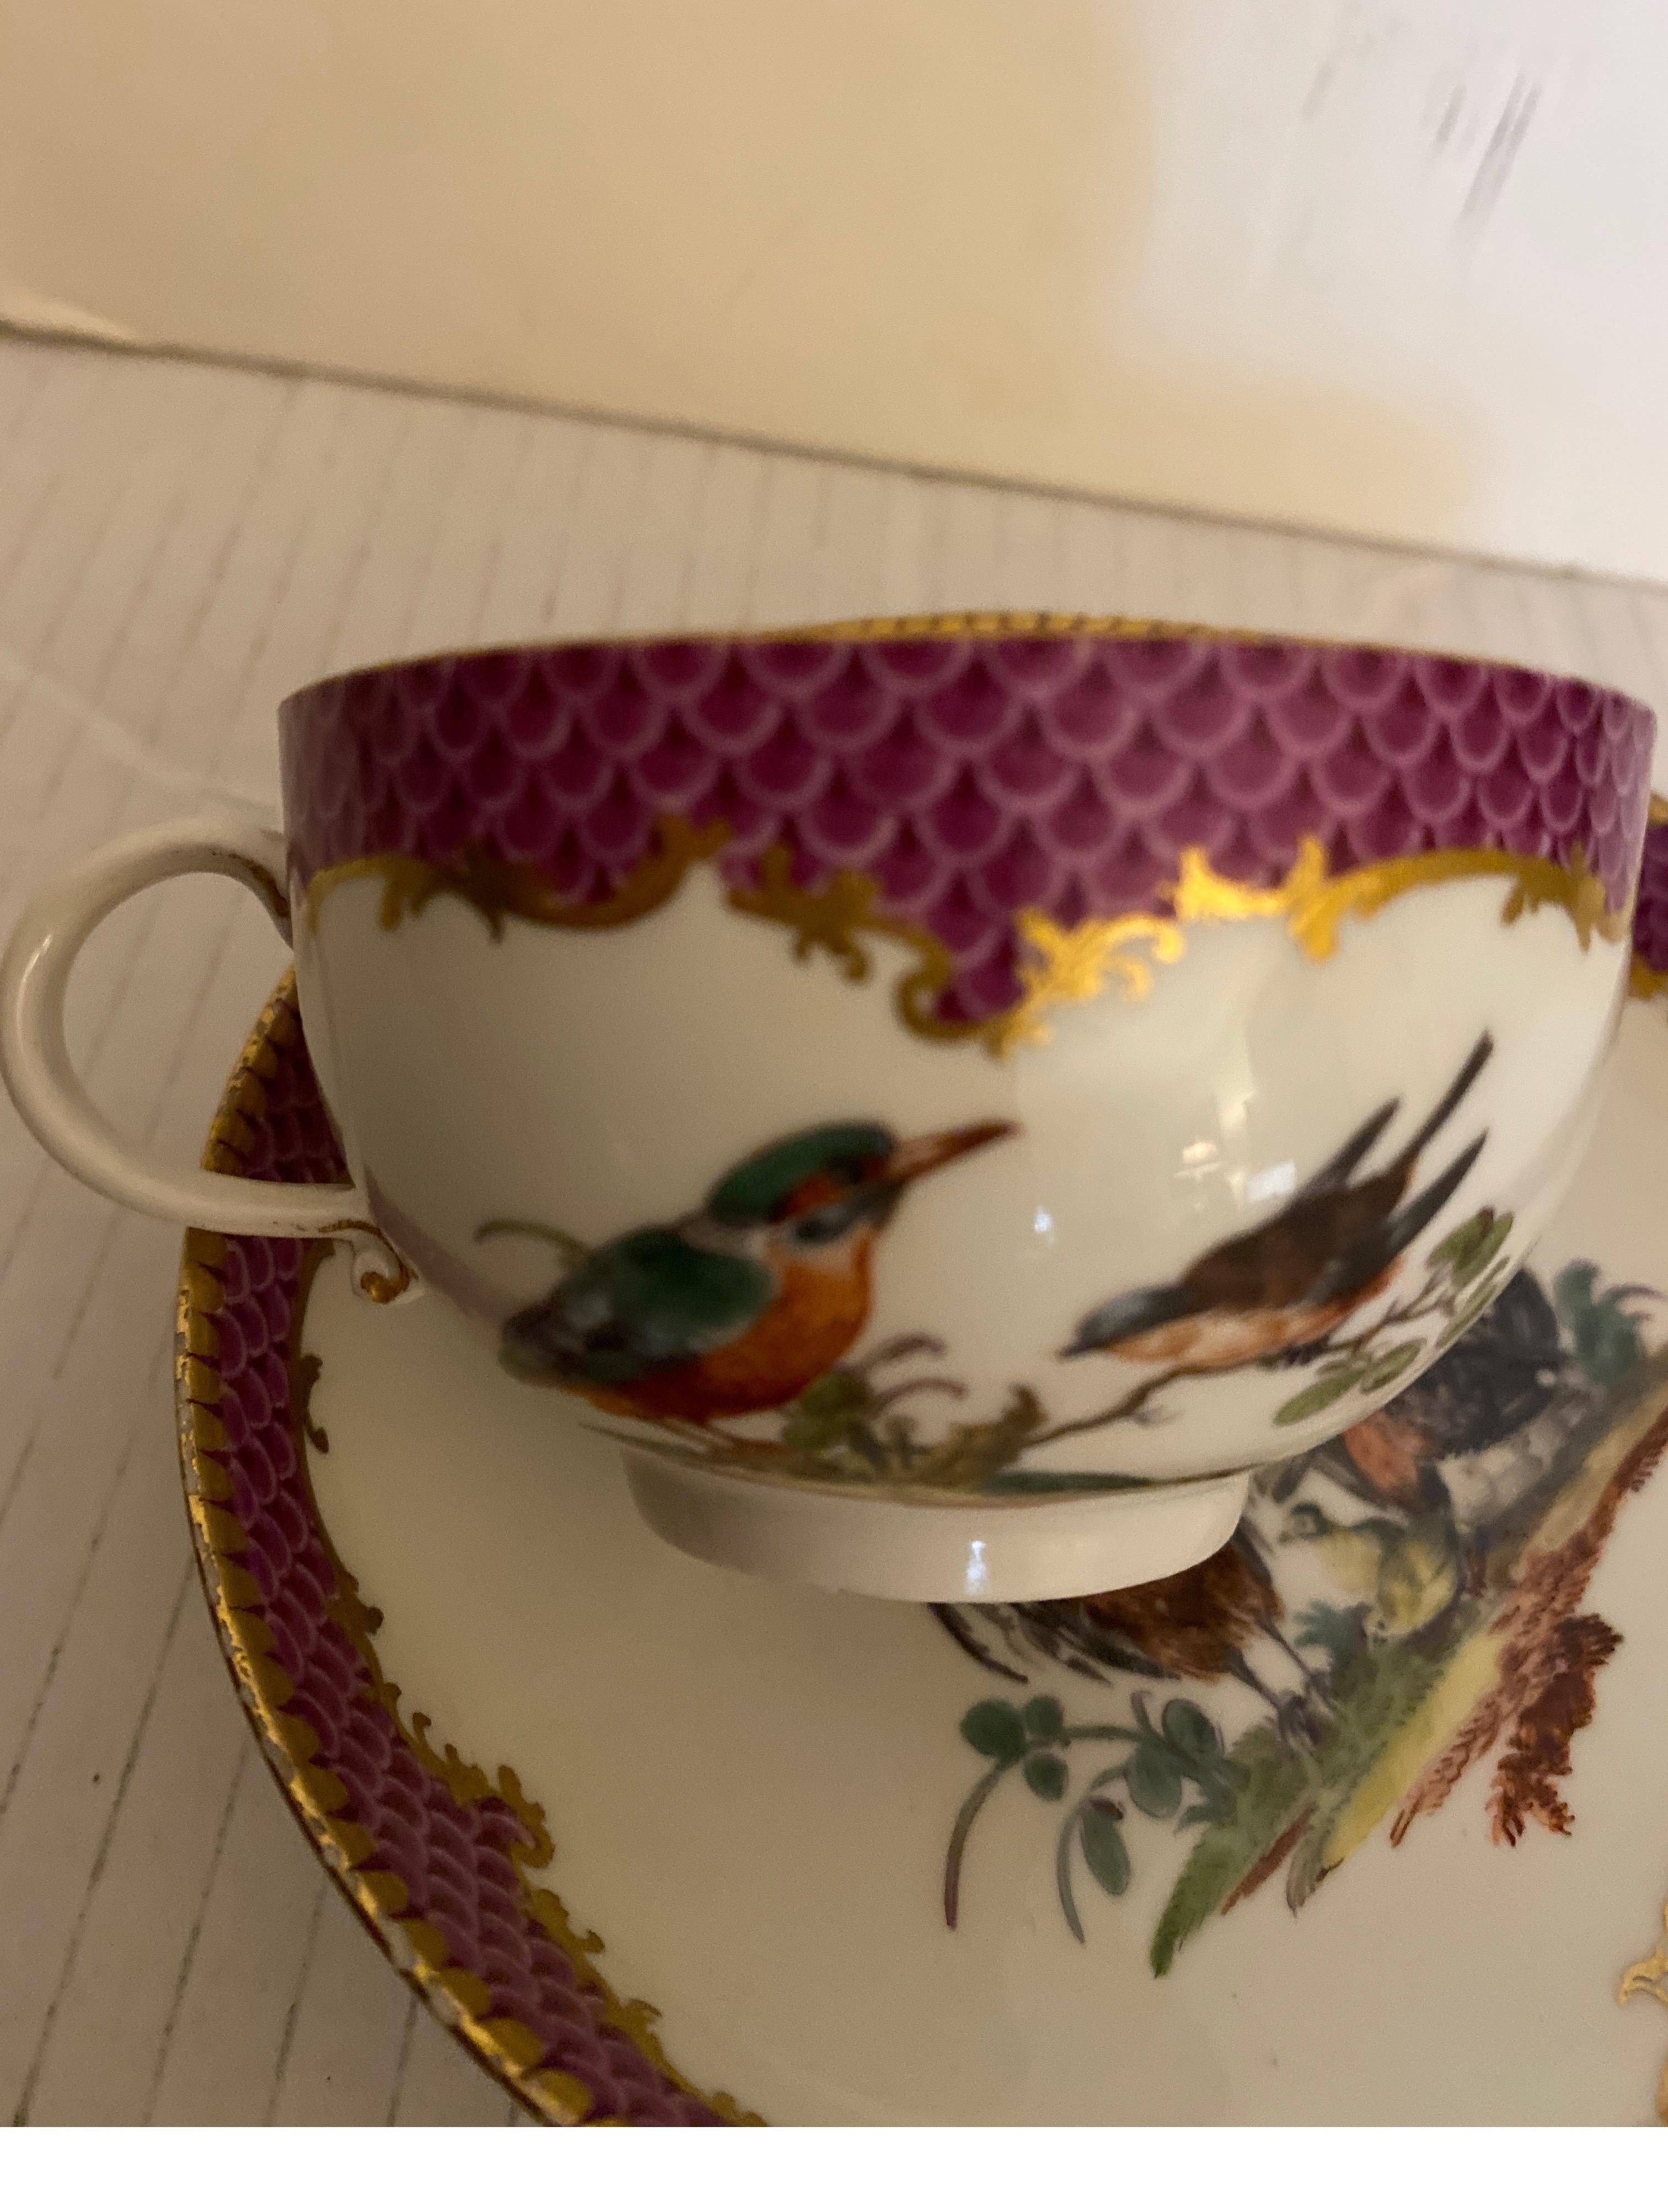 Diminutive whimsical 19th century Meissen cup and saucer. The purple trim with gilt decoration with birds and insects. The saucer is 5 inches in diameter with the cup 2.75 in diameter not including the handle.